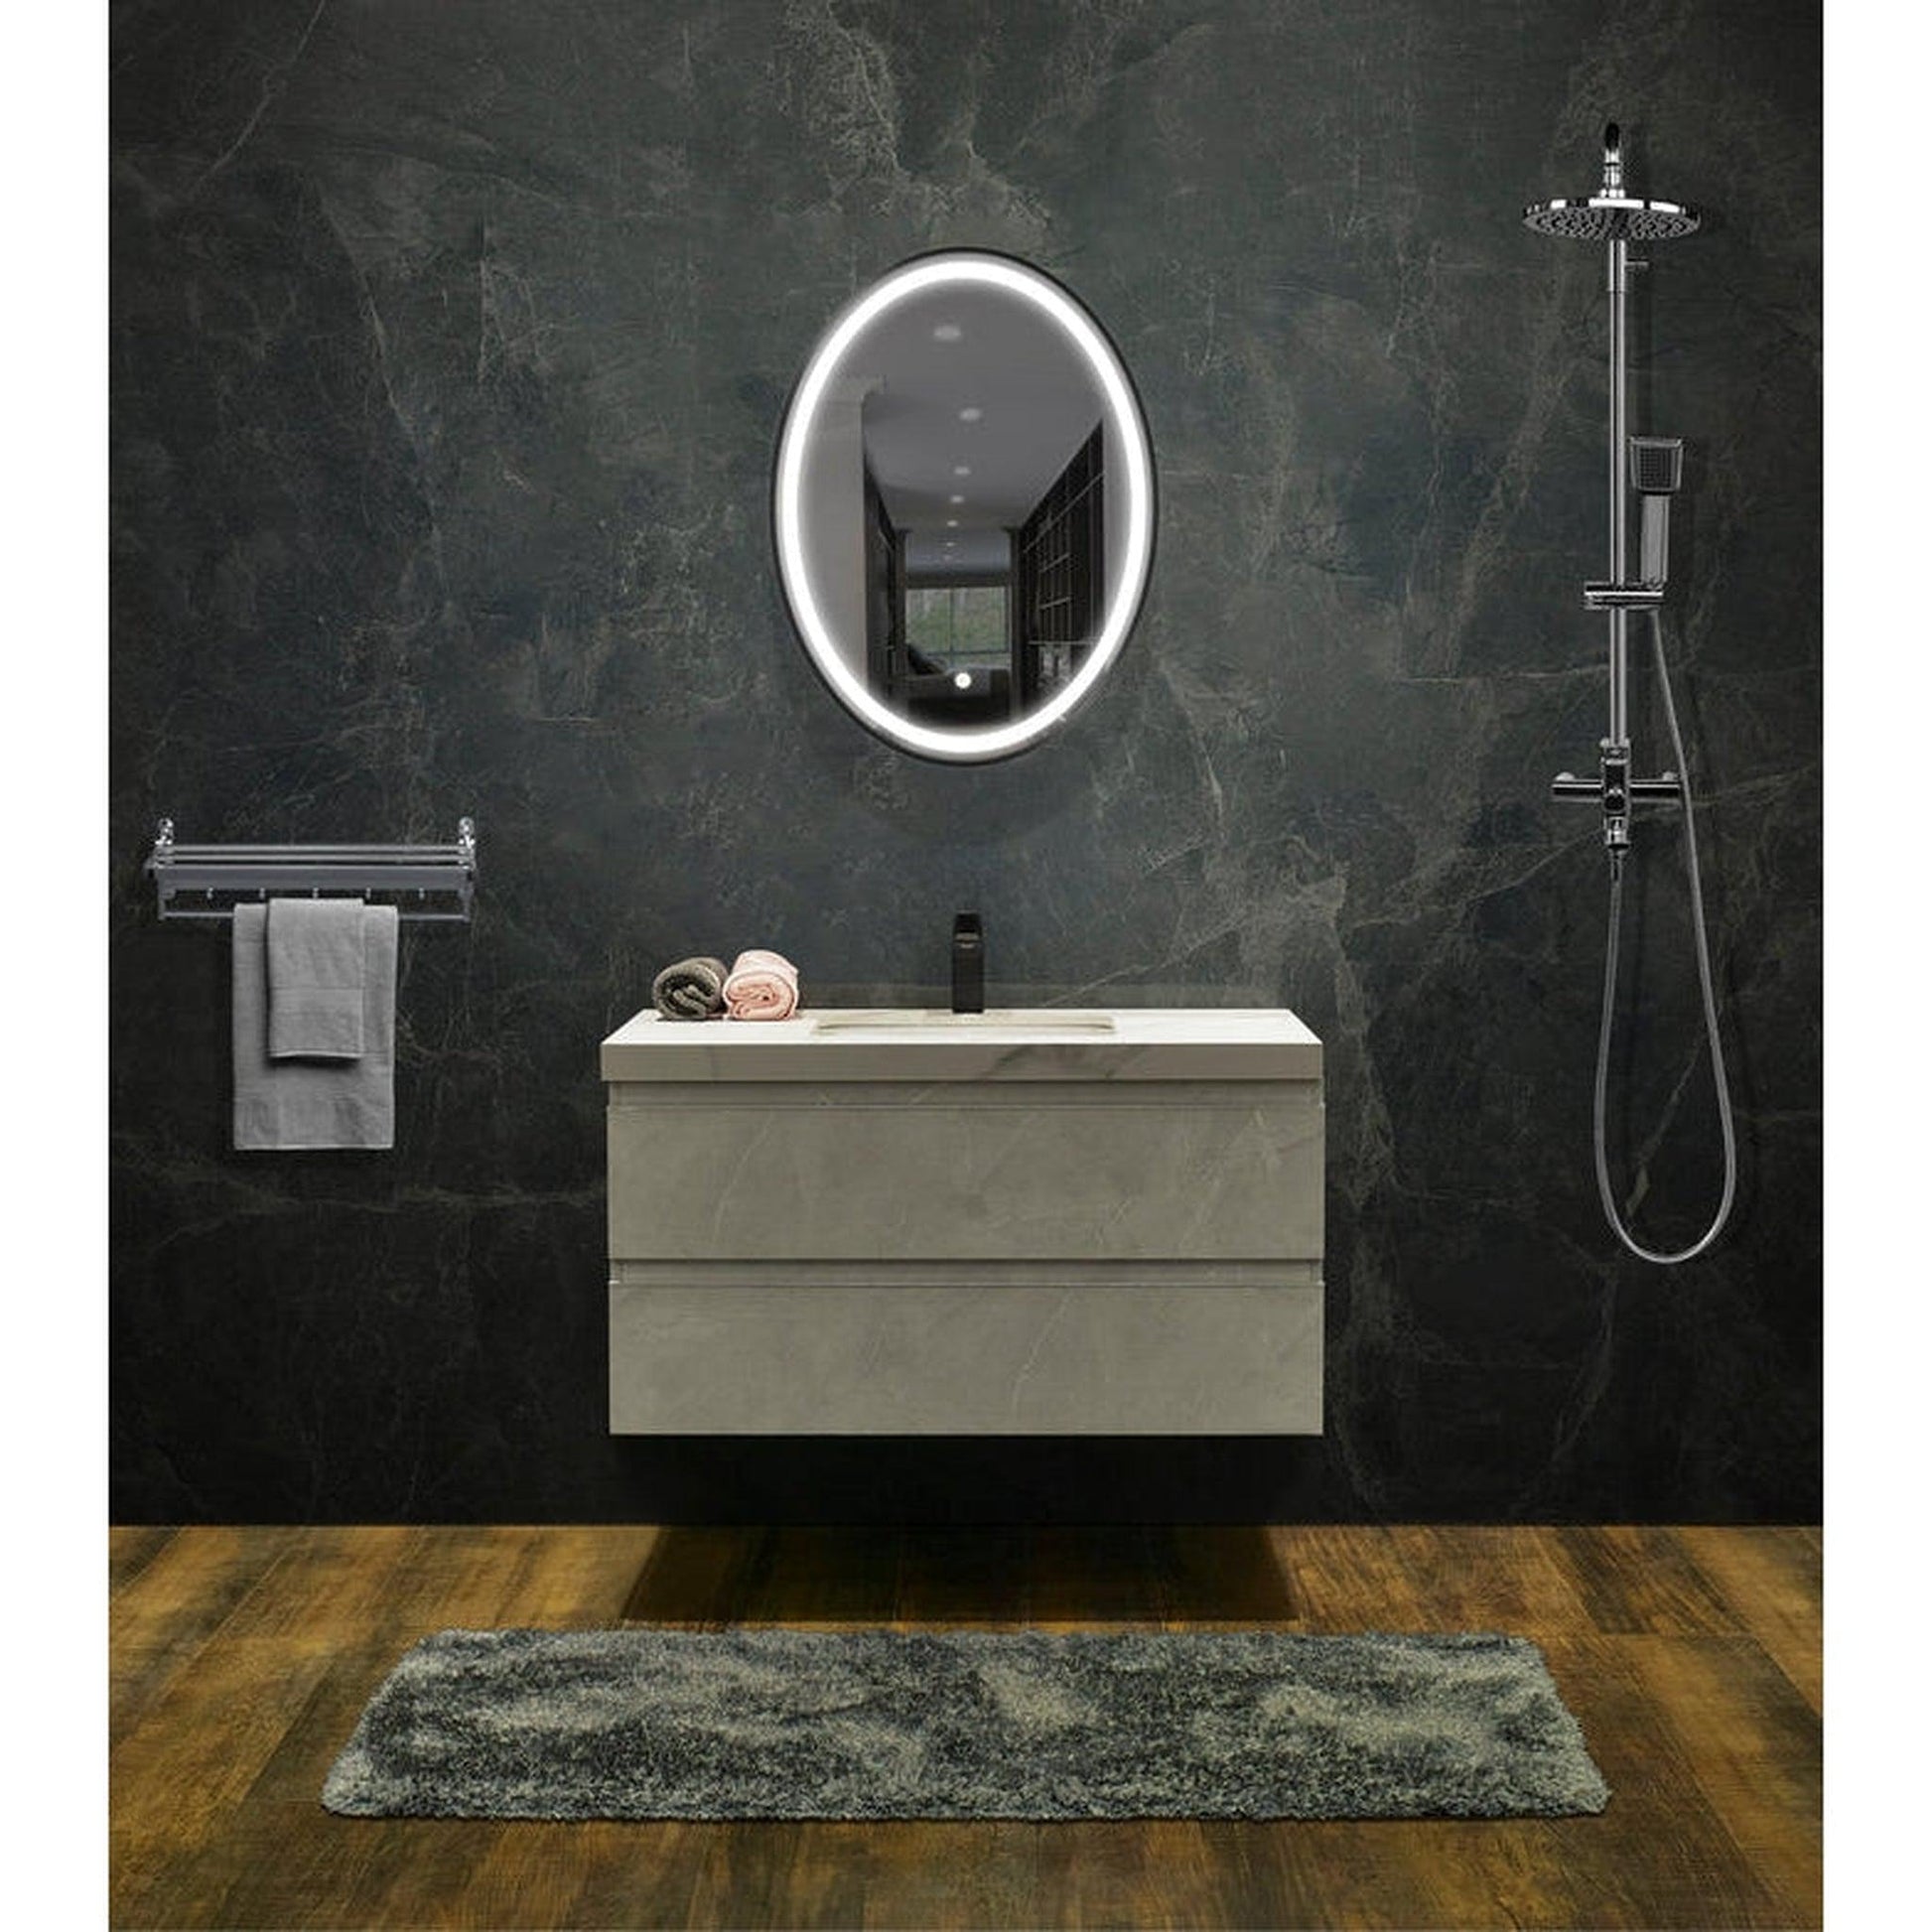 Vanity Art 24" W x 32" H Black Oval LED Lighted Bathroom Vanity Wall Mirror With Touch Sensor